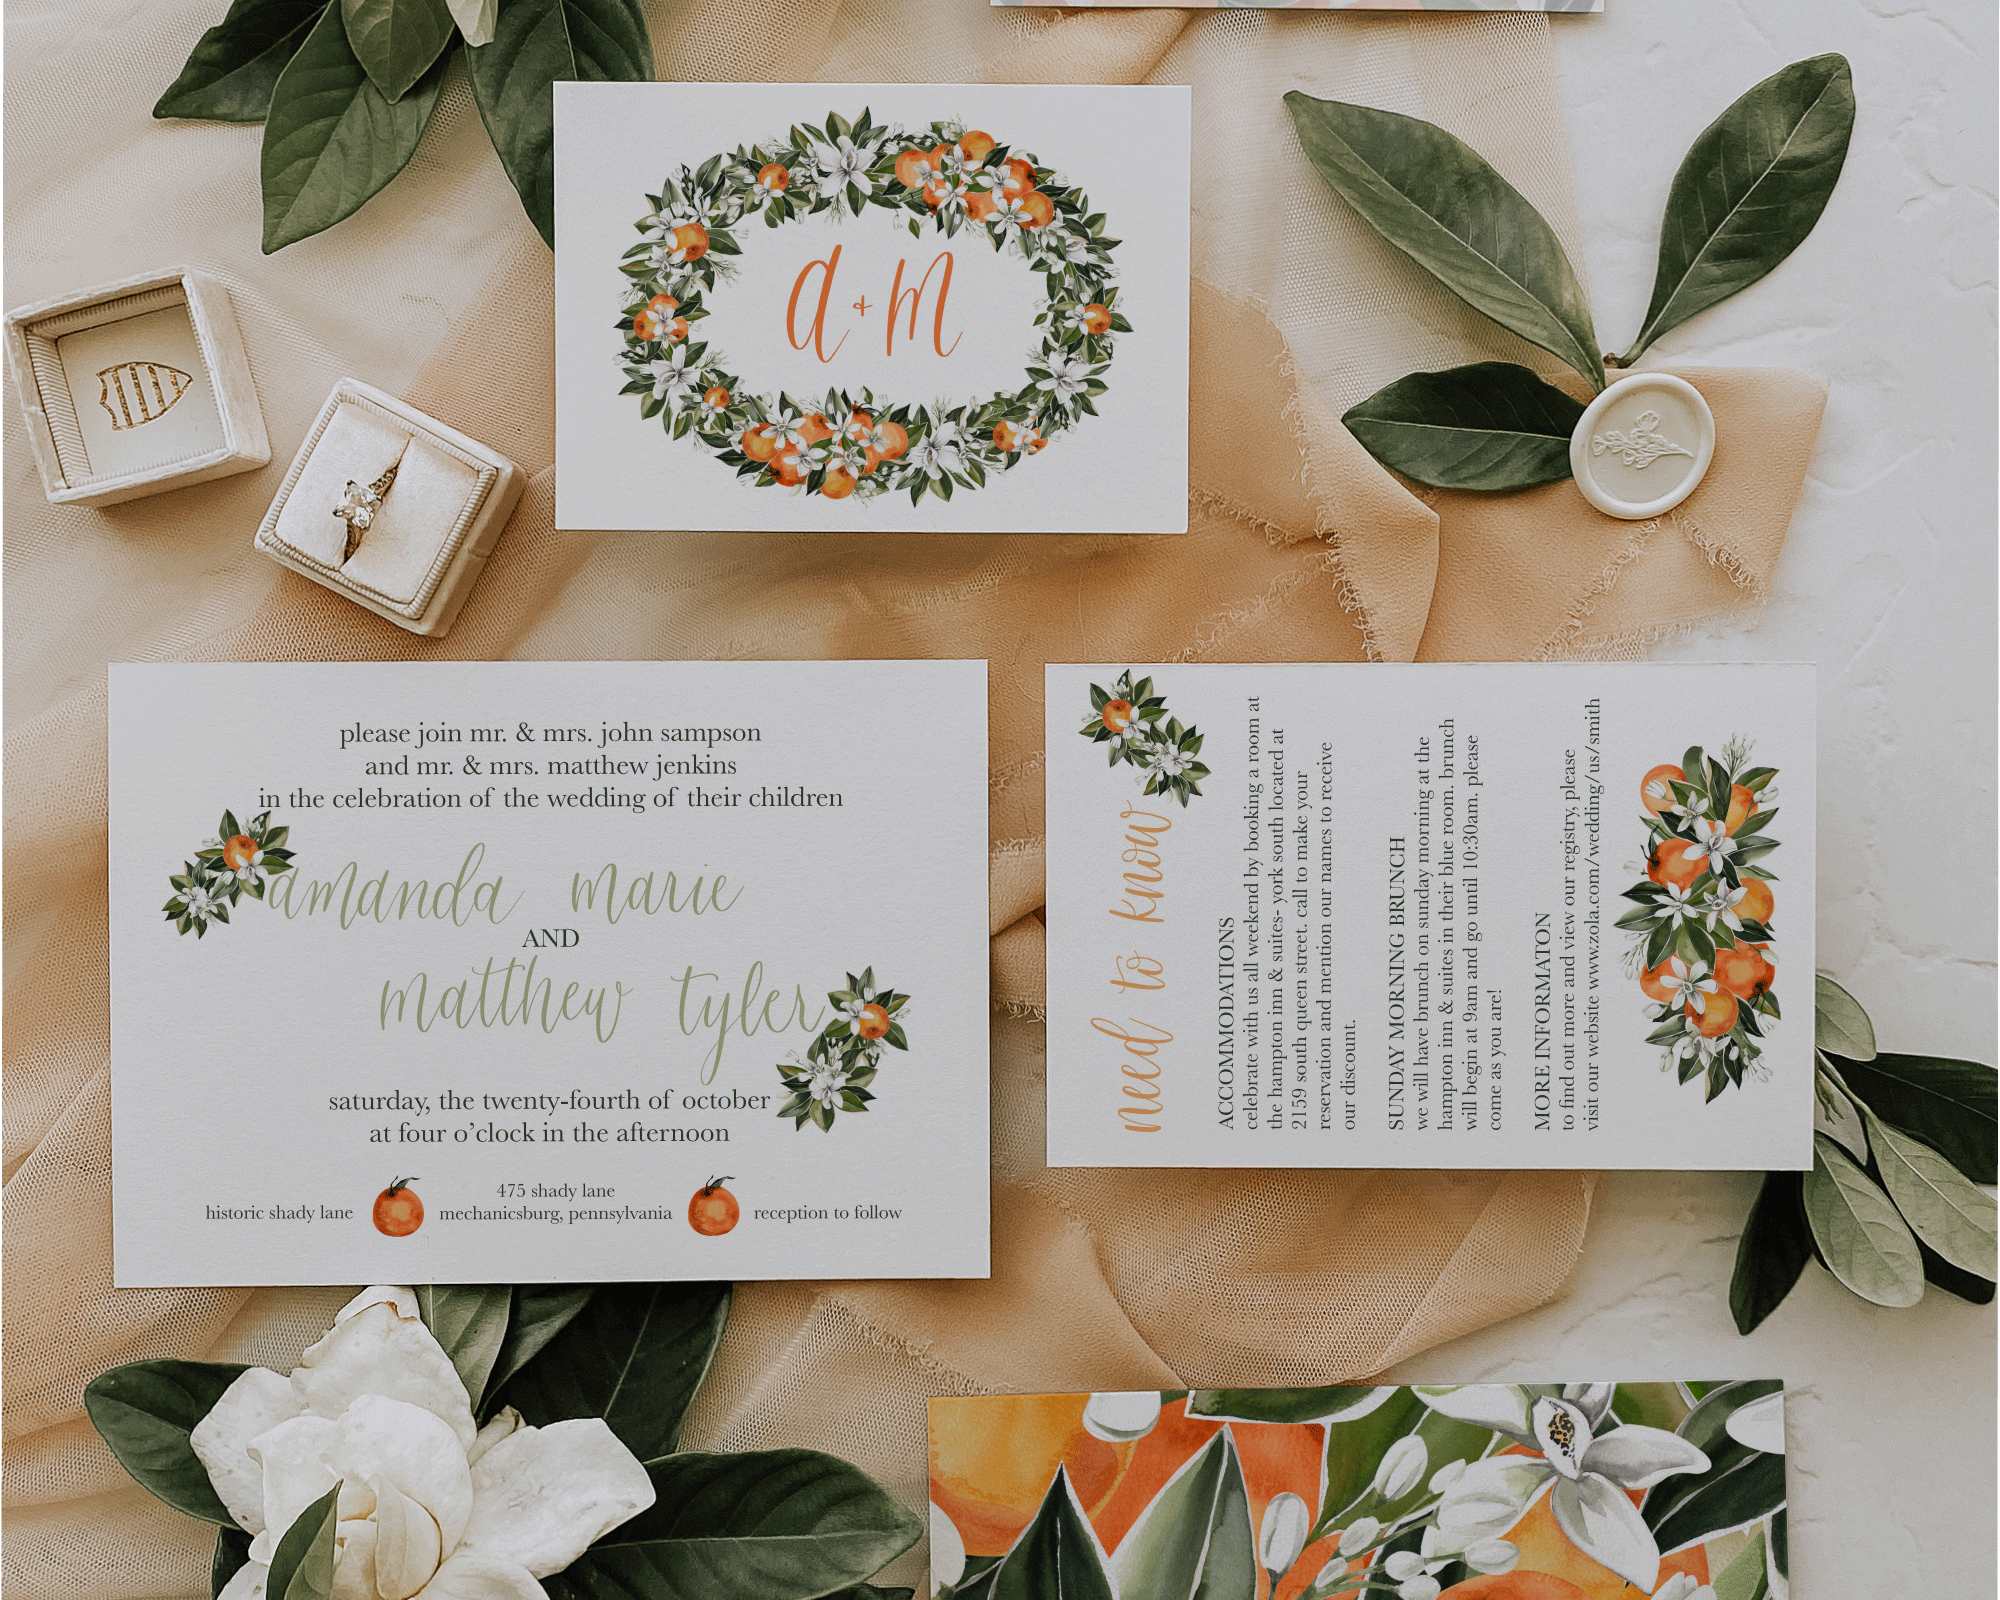 HOW TO HAVE ECO-FRIENDLY WEDDING INVITATIONS IN 2021